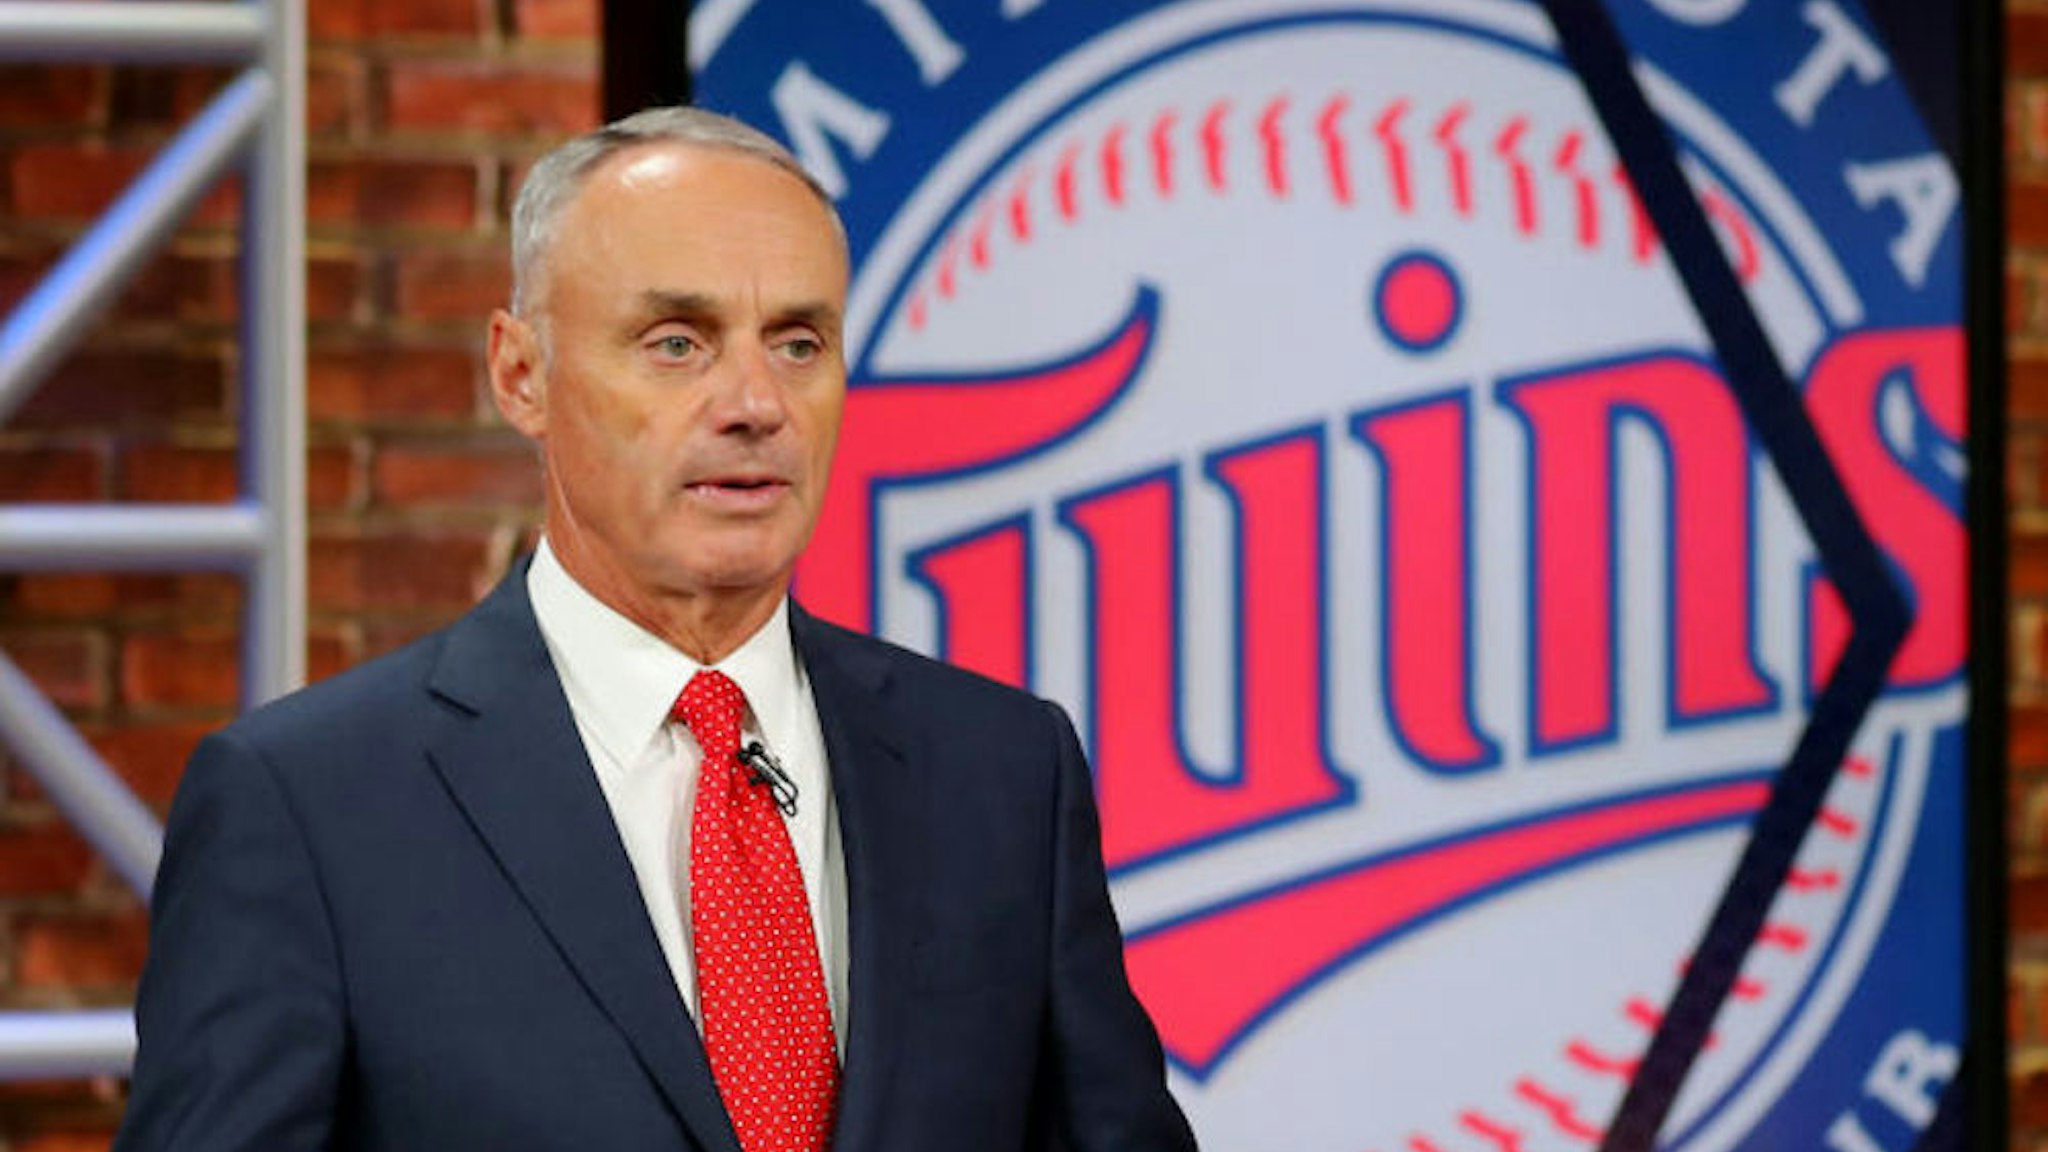 SECAUCUS, NJ - JUNE 10: Major League Baseball Commissioner Robert D. Manfred Jr. announces the 27th pick of the 2020 MLB Draft is Aaron Sabato by the Minnesota Twins during the 2020 Major League Baseball Draft at MLB Network on Wednesday, June 10, 2020 in Secaucus, New Jersey. (Photo by Alex Trautwig/MLB Photos via Getty Images)